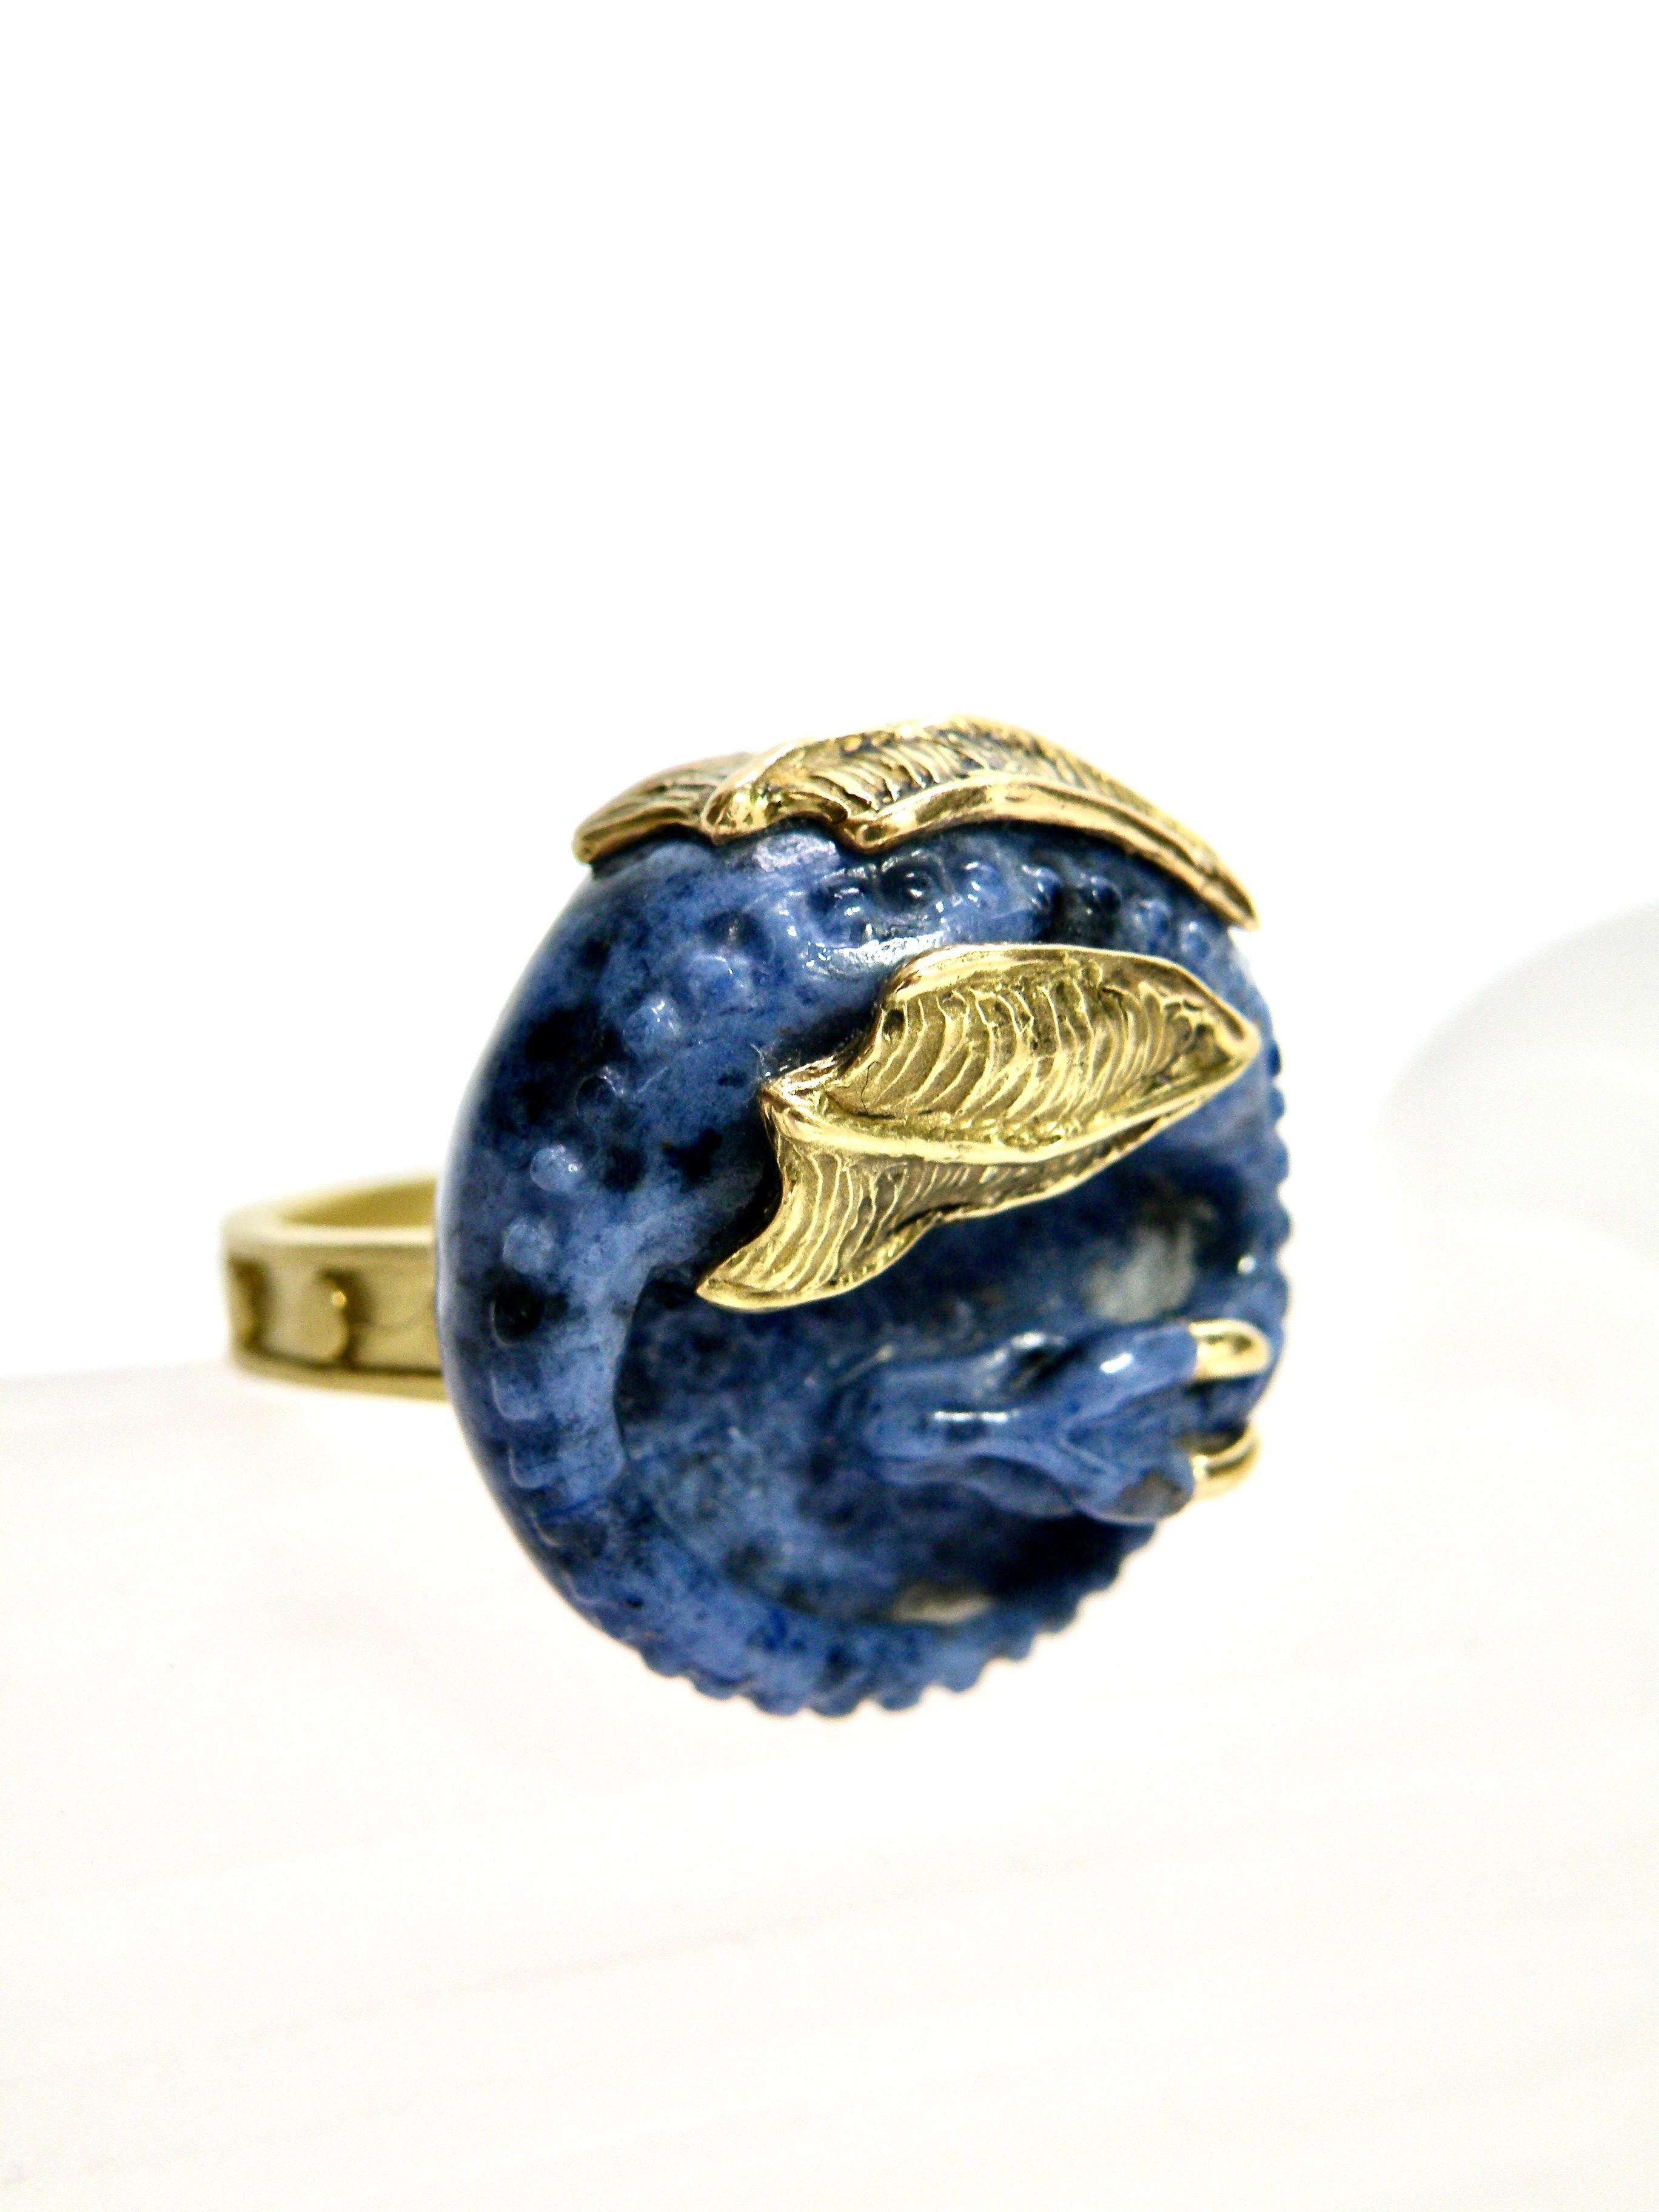 18k gold claw and wing  mysterious rare blue stone dragon ring hand carved by master carver in idar oberstein this ancient prayer ring is size 8 and can be made in different size stone is 28mm